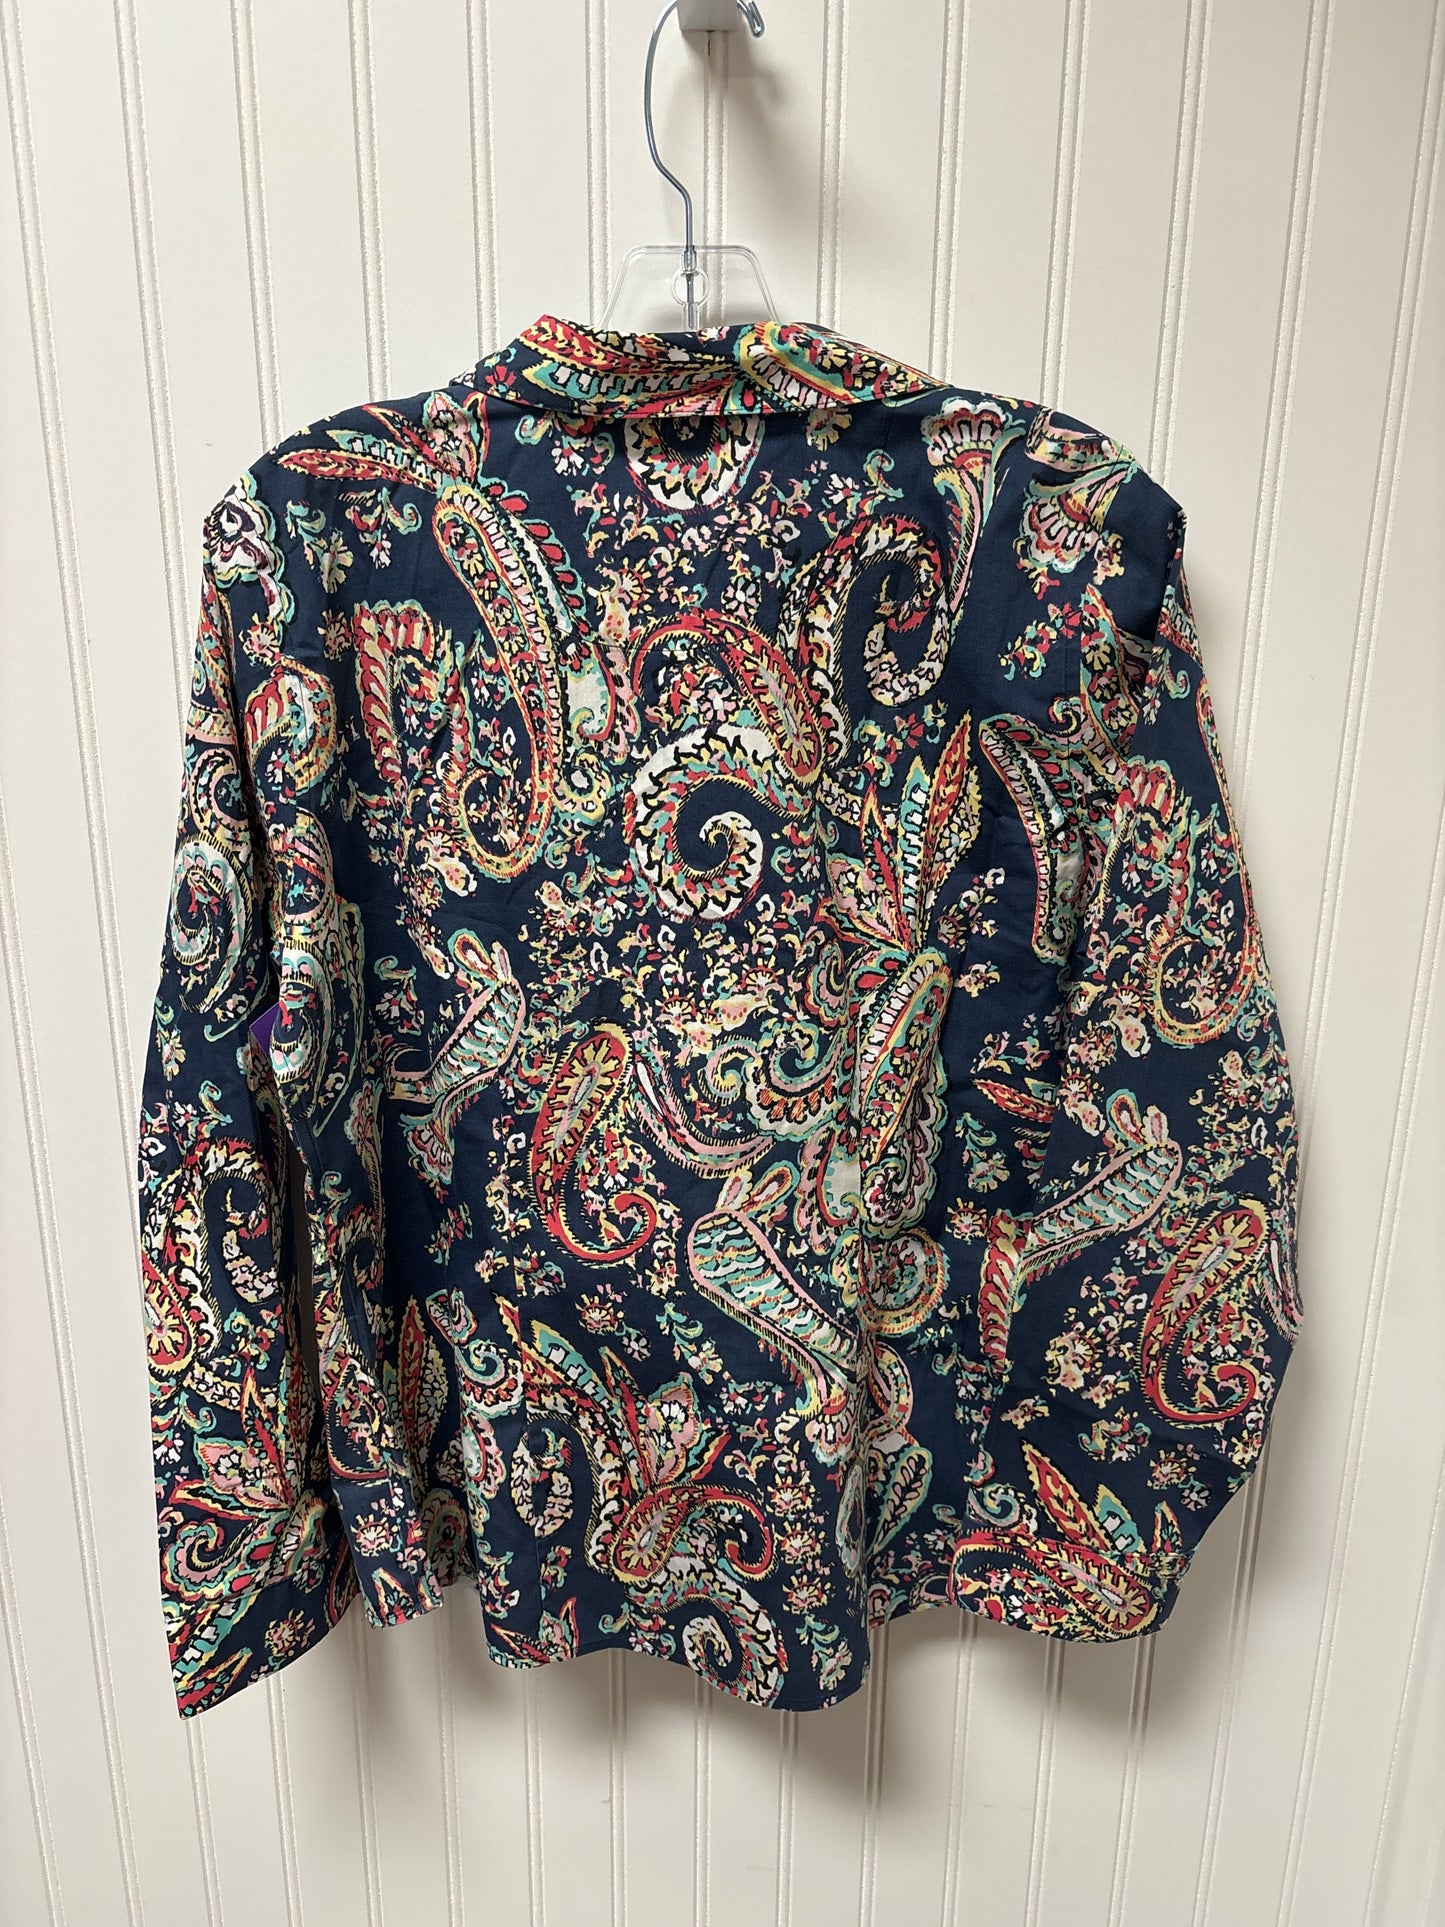 Navy Blouse Long Sleeve Chicos, Size M